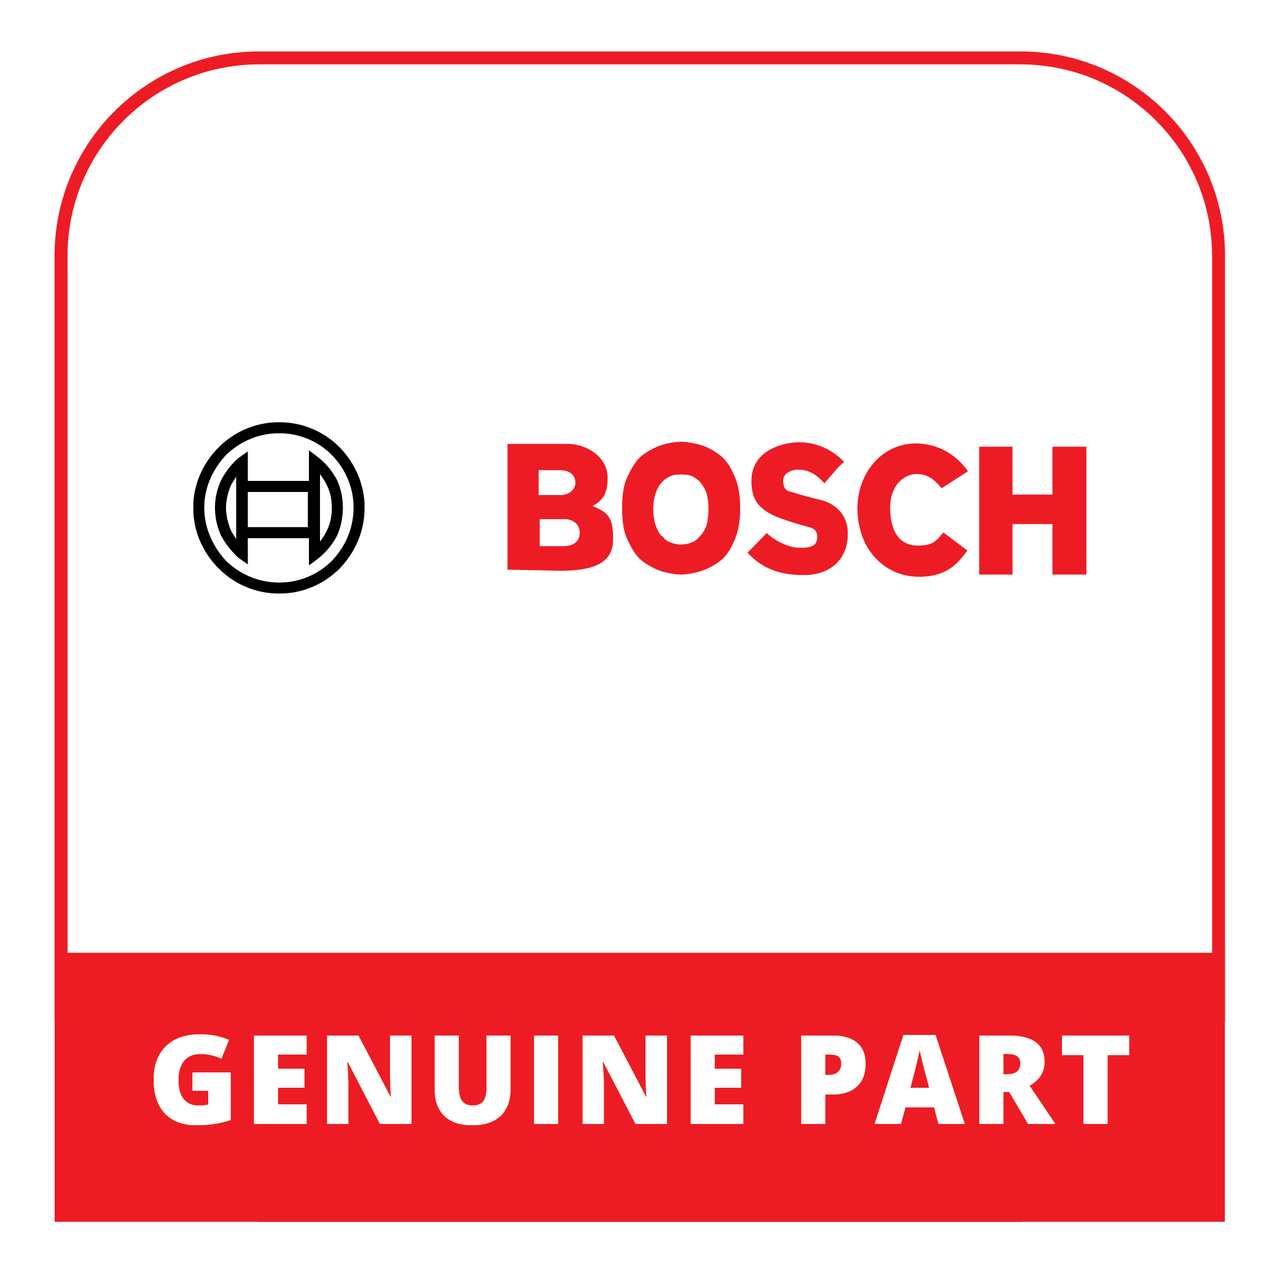 Bosch (Thermador) 20000874 - Housing Part - Genuine Bosch (Thermador) Part